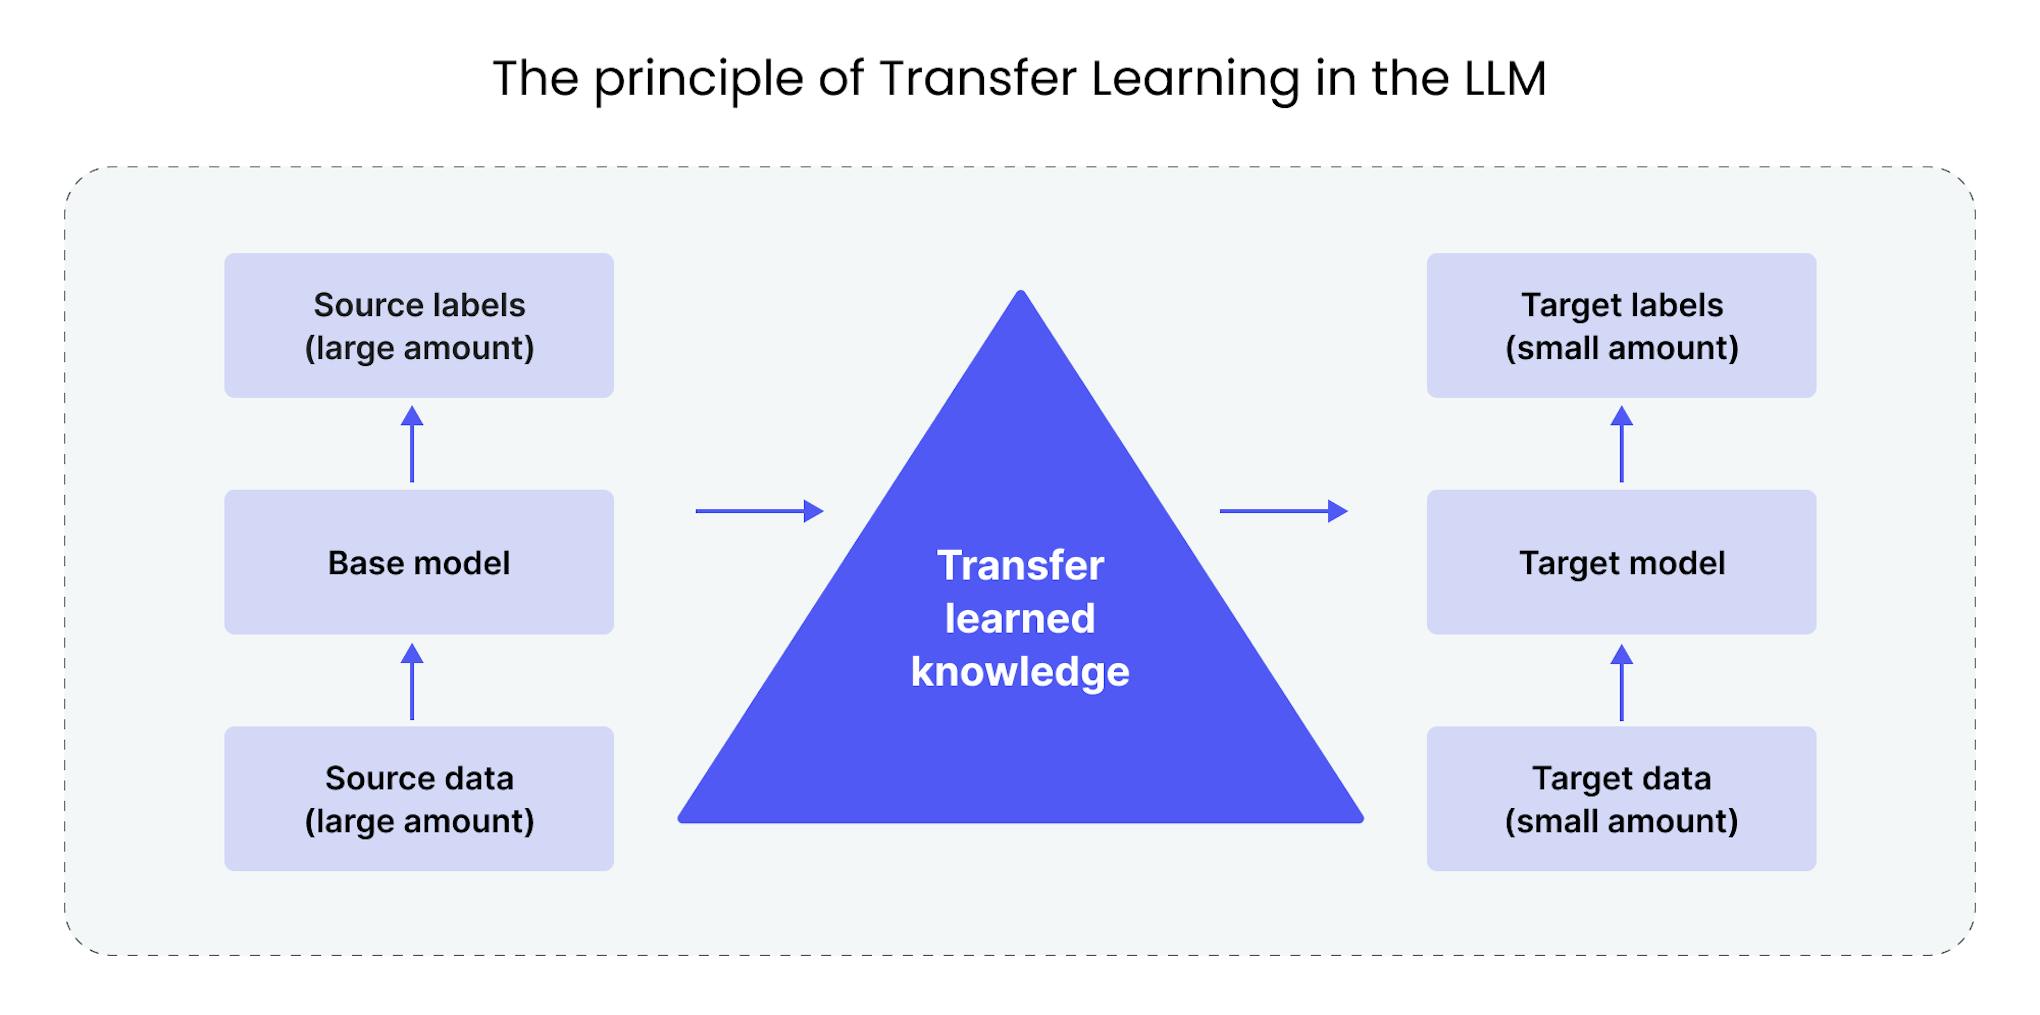 The principle of Transfer Learning in the LLM